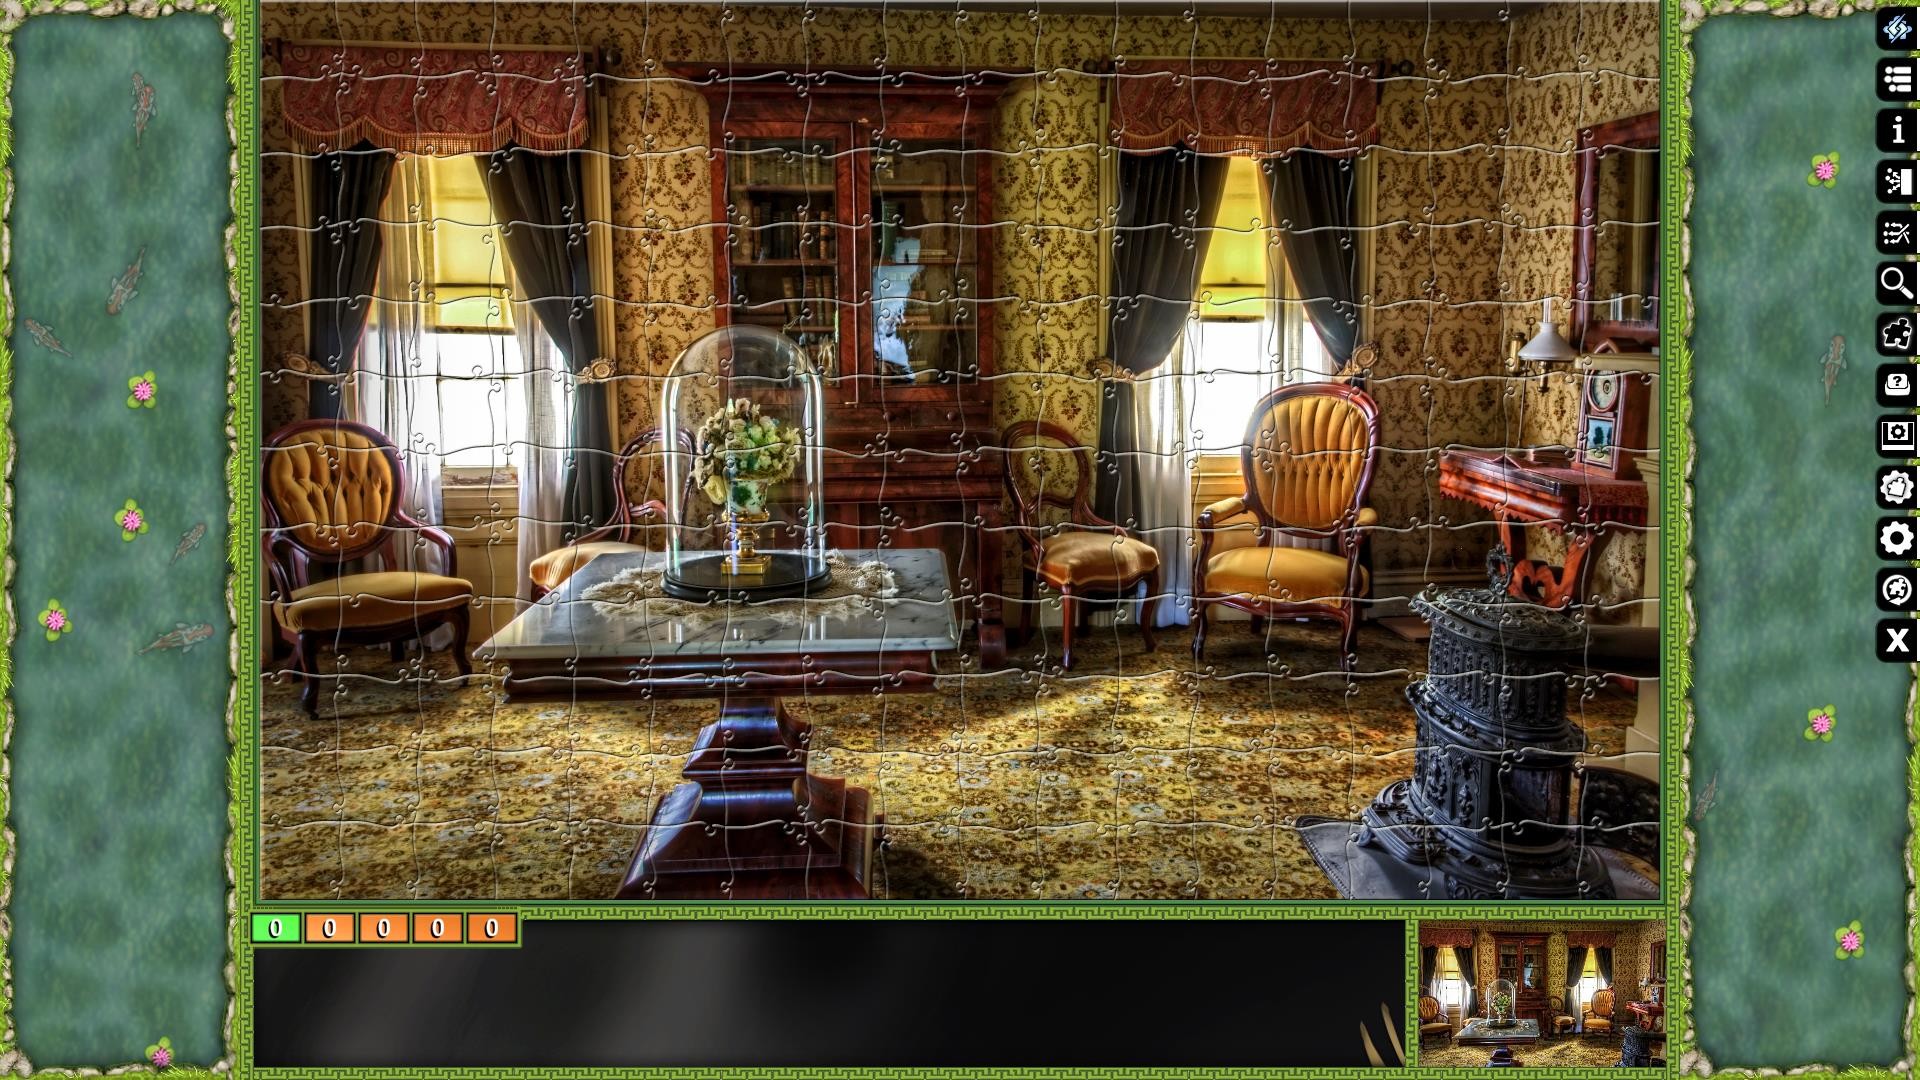 Jigsaw Puzzle Pack - Pixel Puzzles Ultimate: Variety Pack 10 screenshot